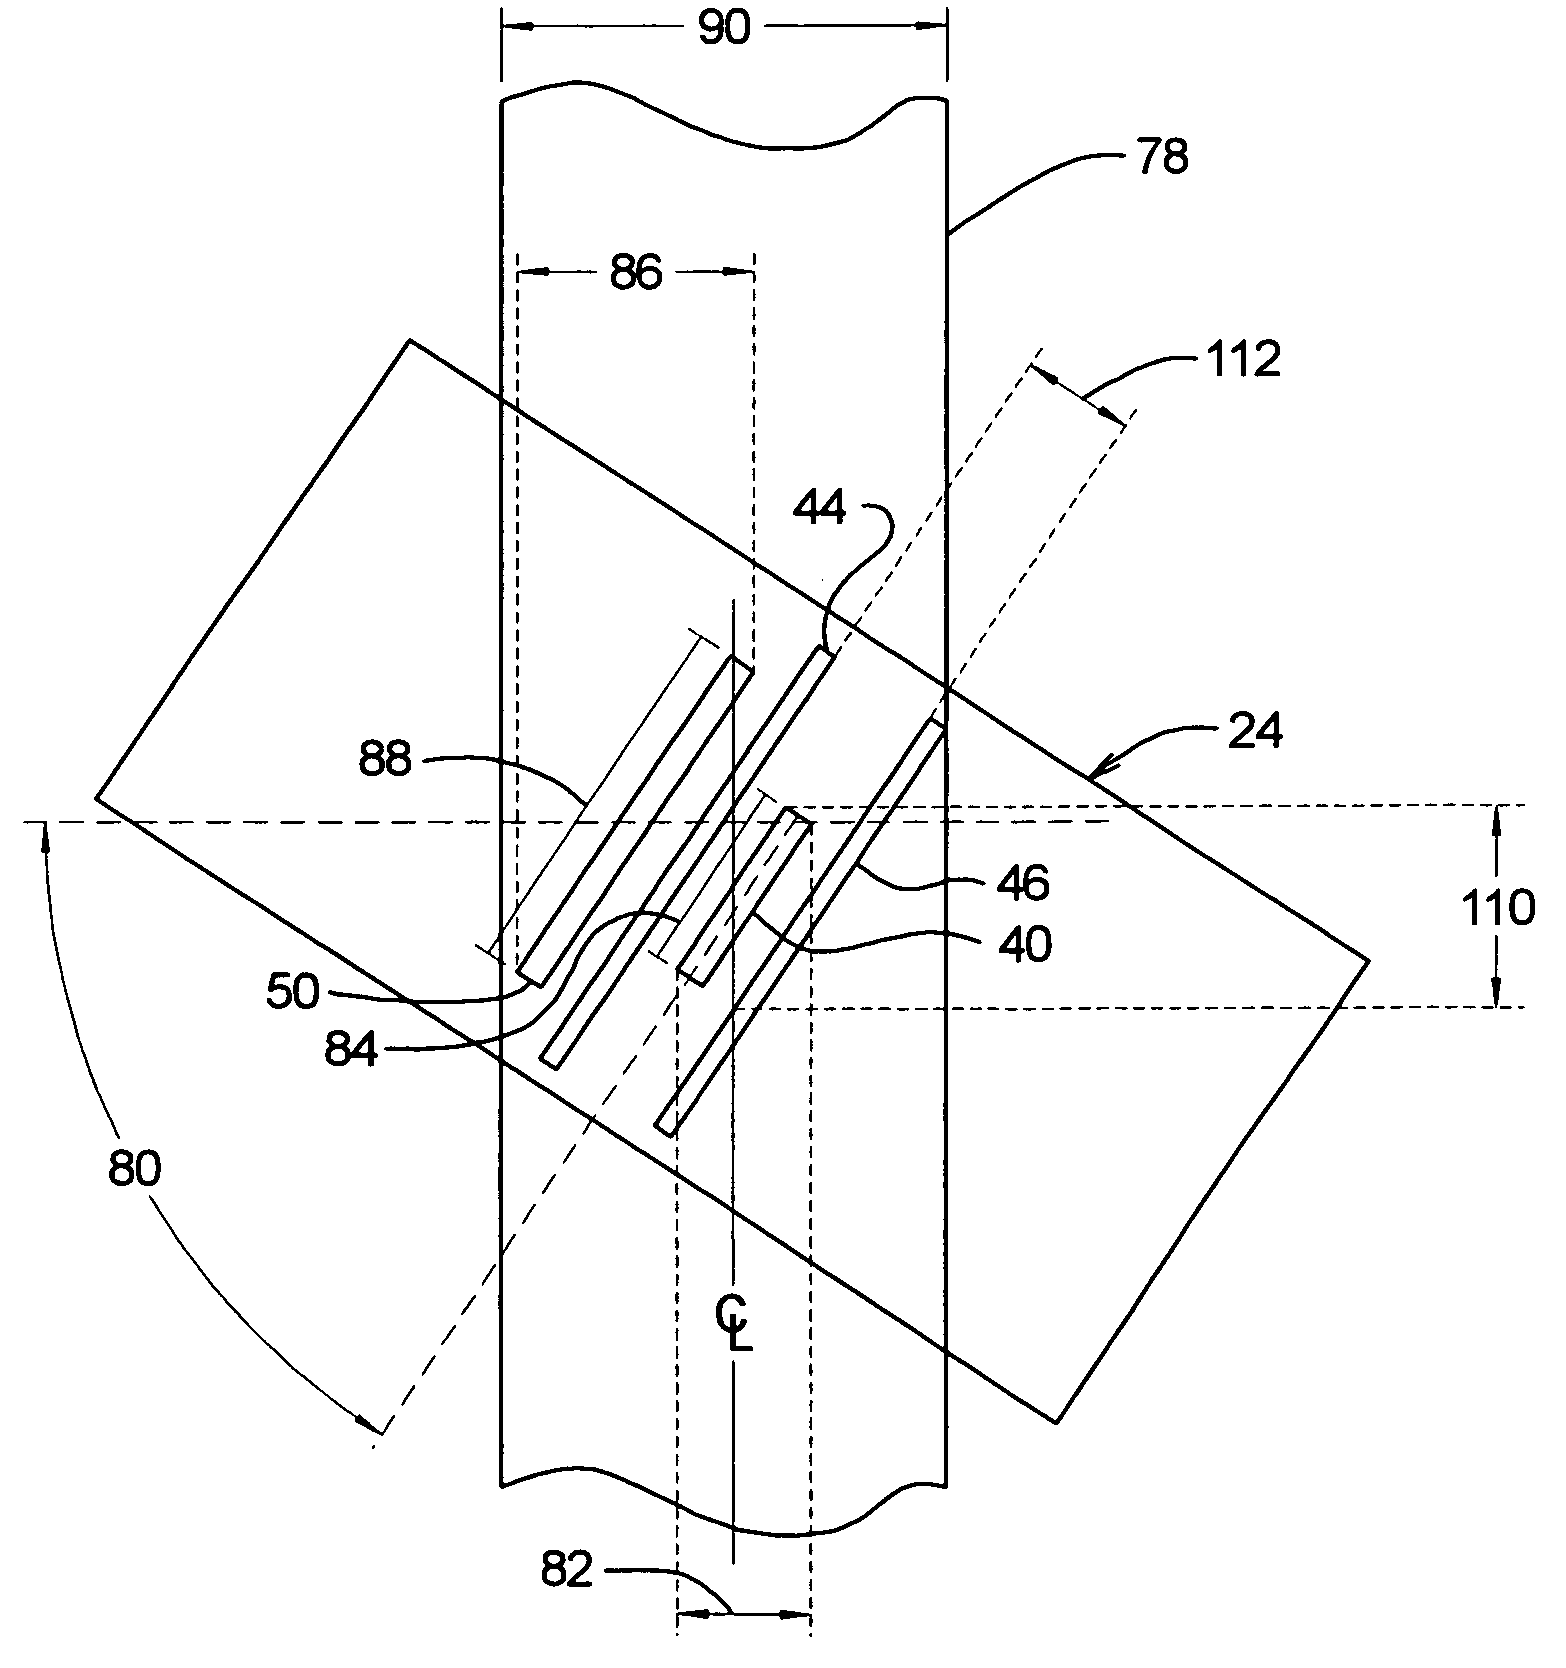 Method and apparatus for reducing effective track width through highly skewed head angles